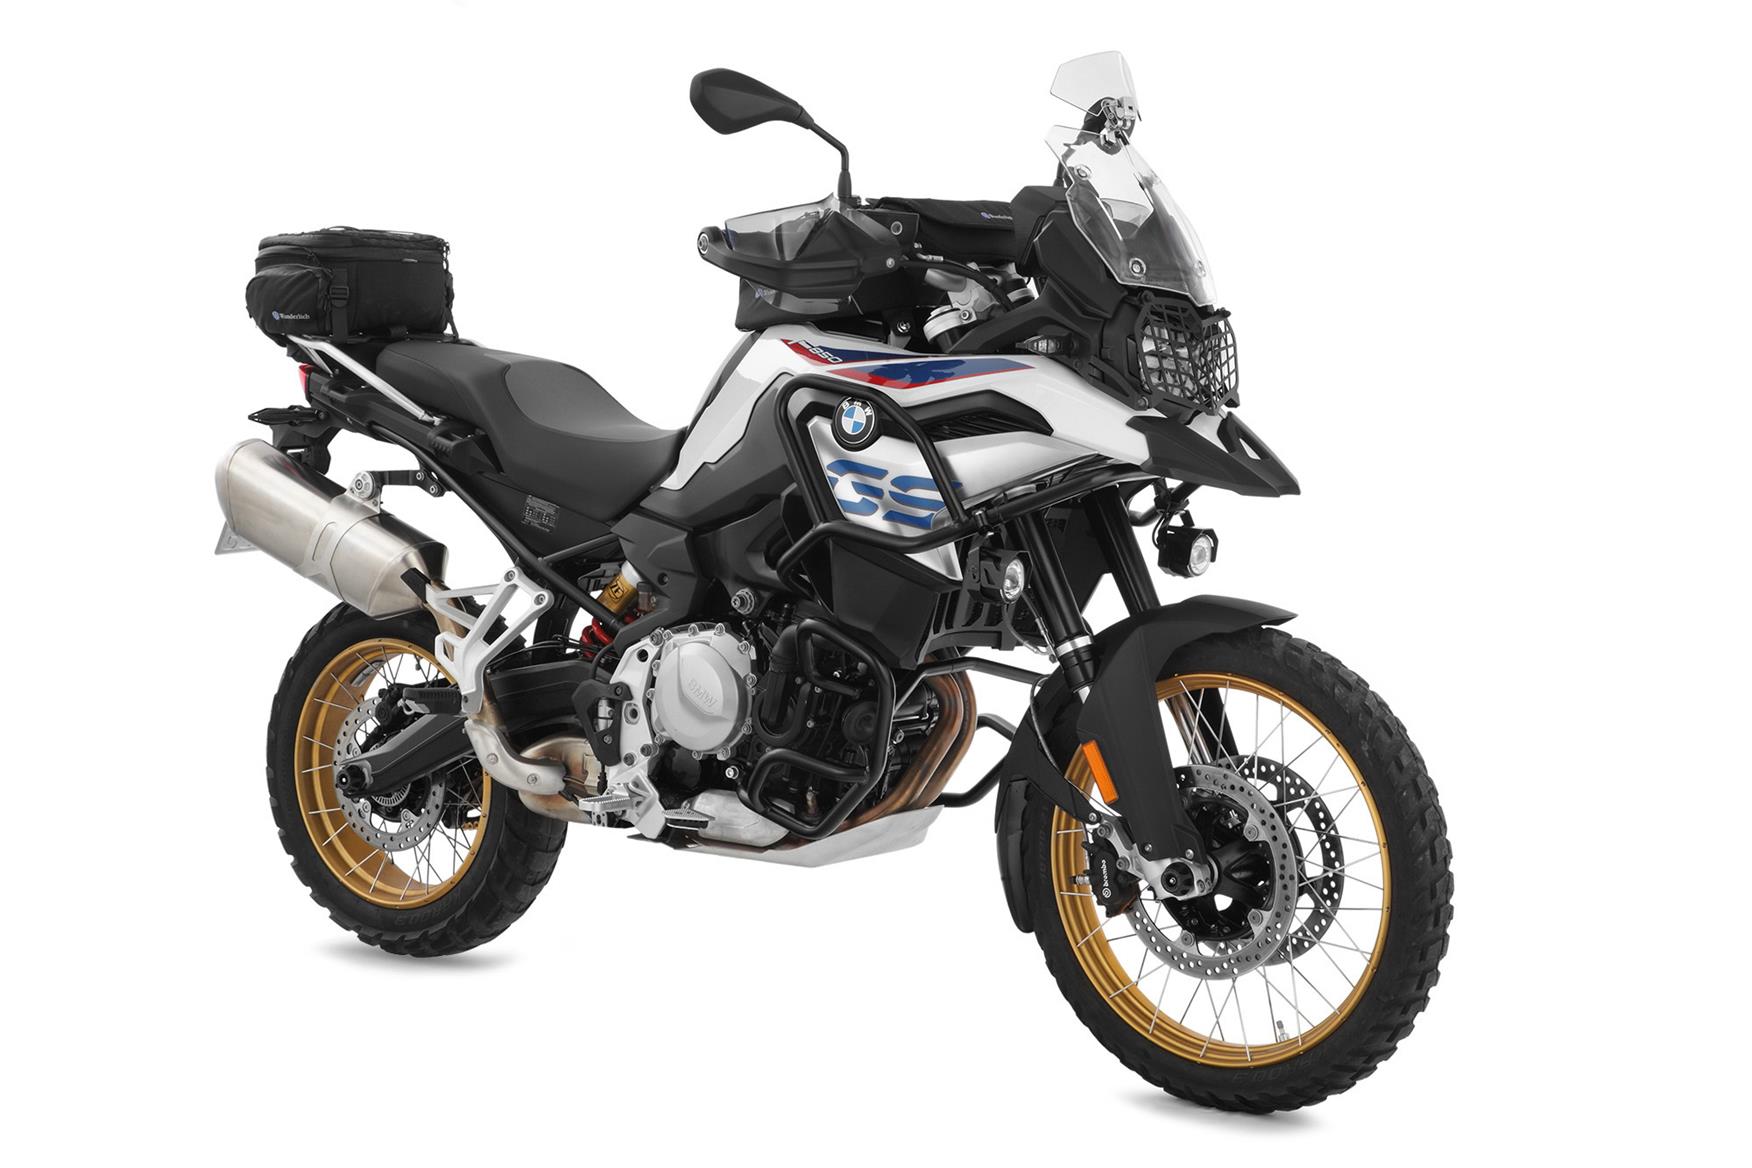 Wunderlich launch new accessories for BMW F850GS | MCN